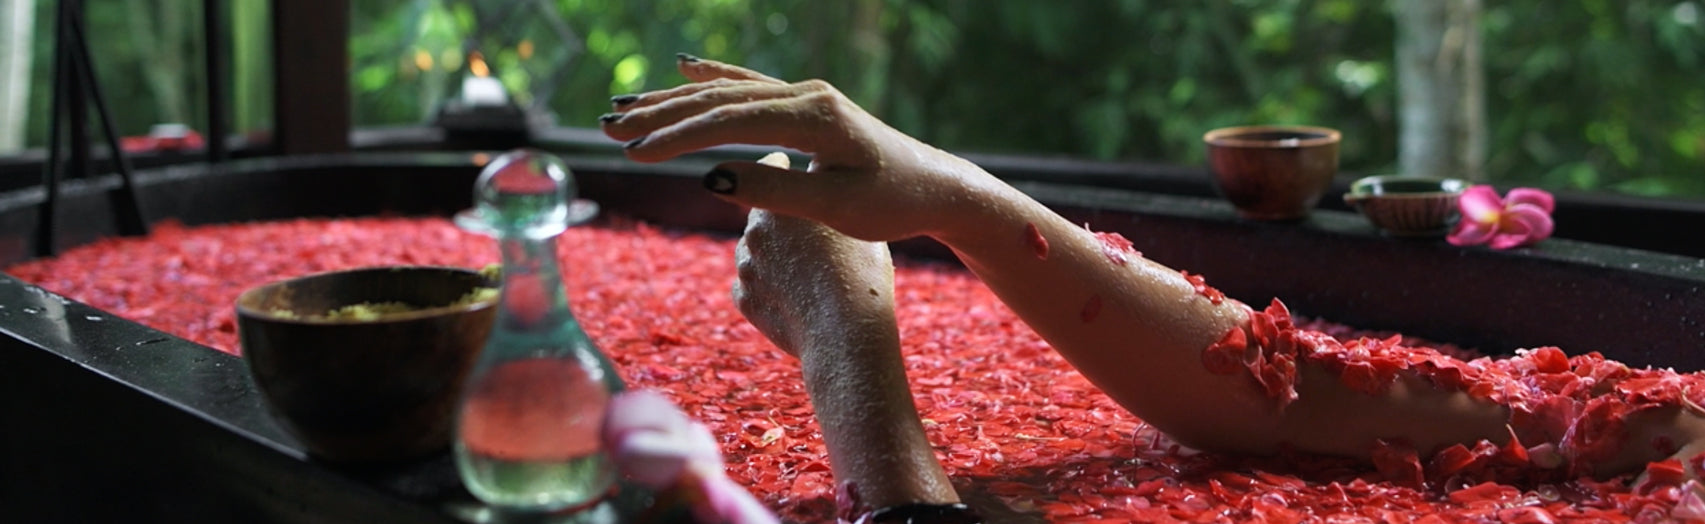 Woman in bath with rose petals